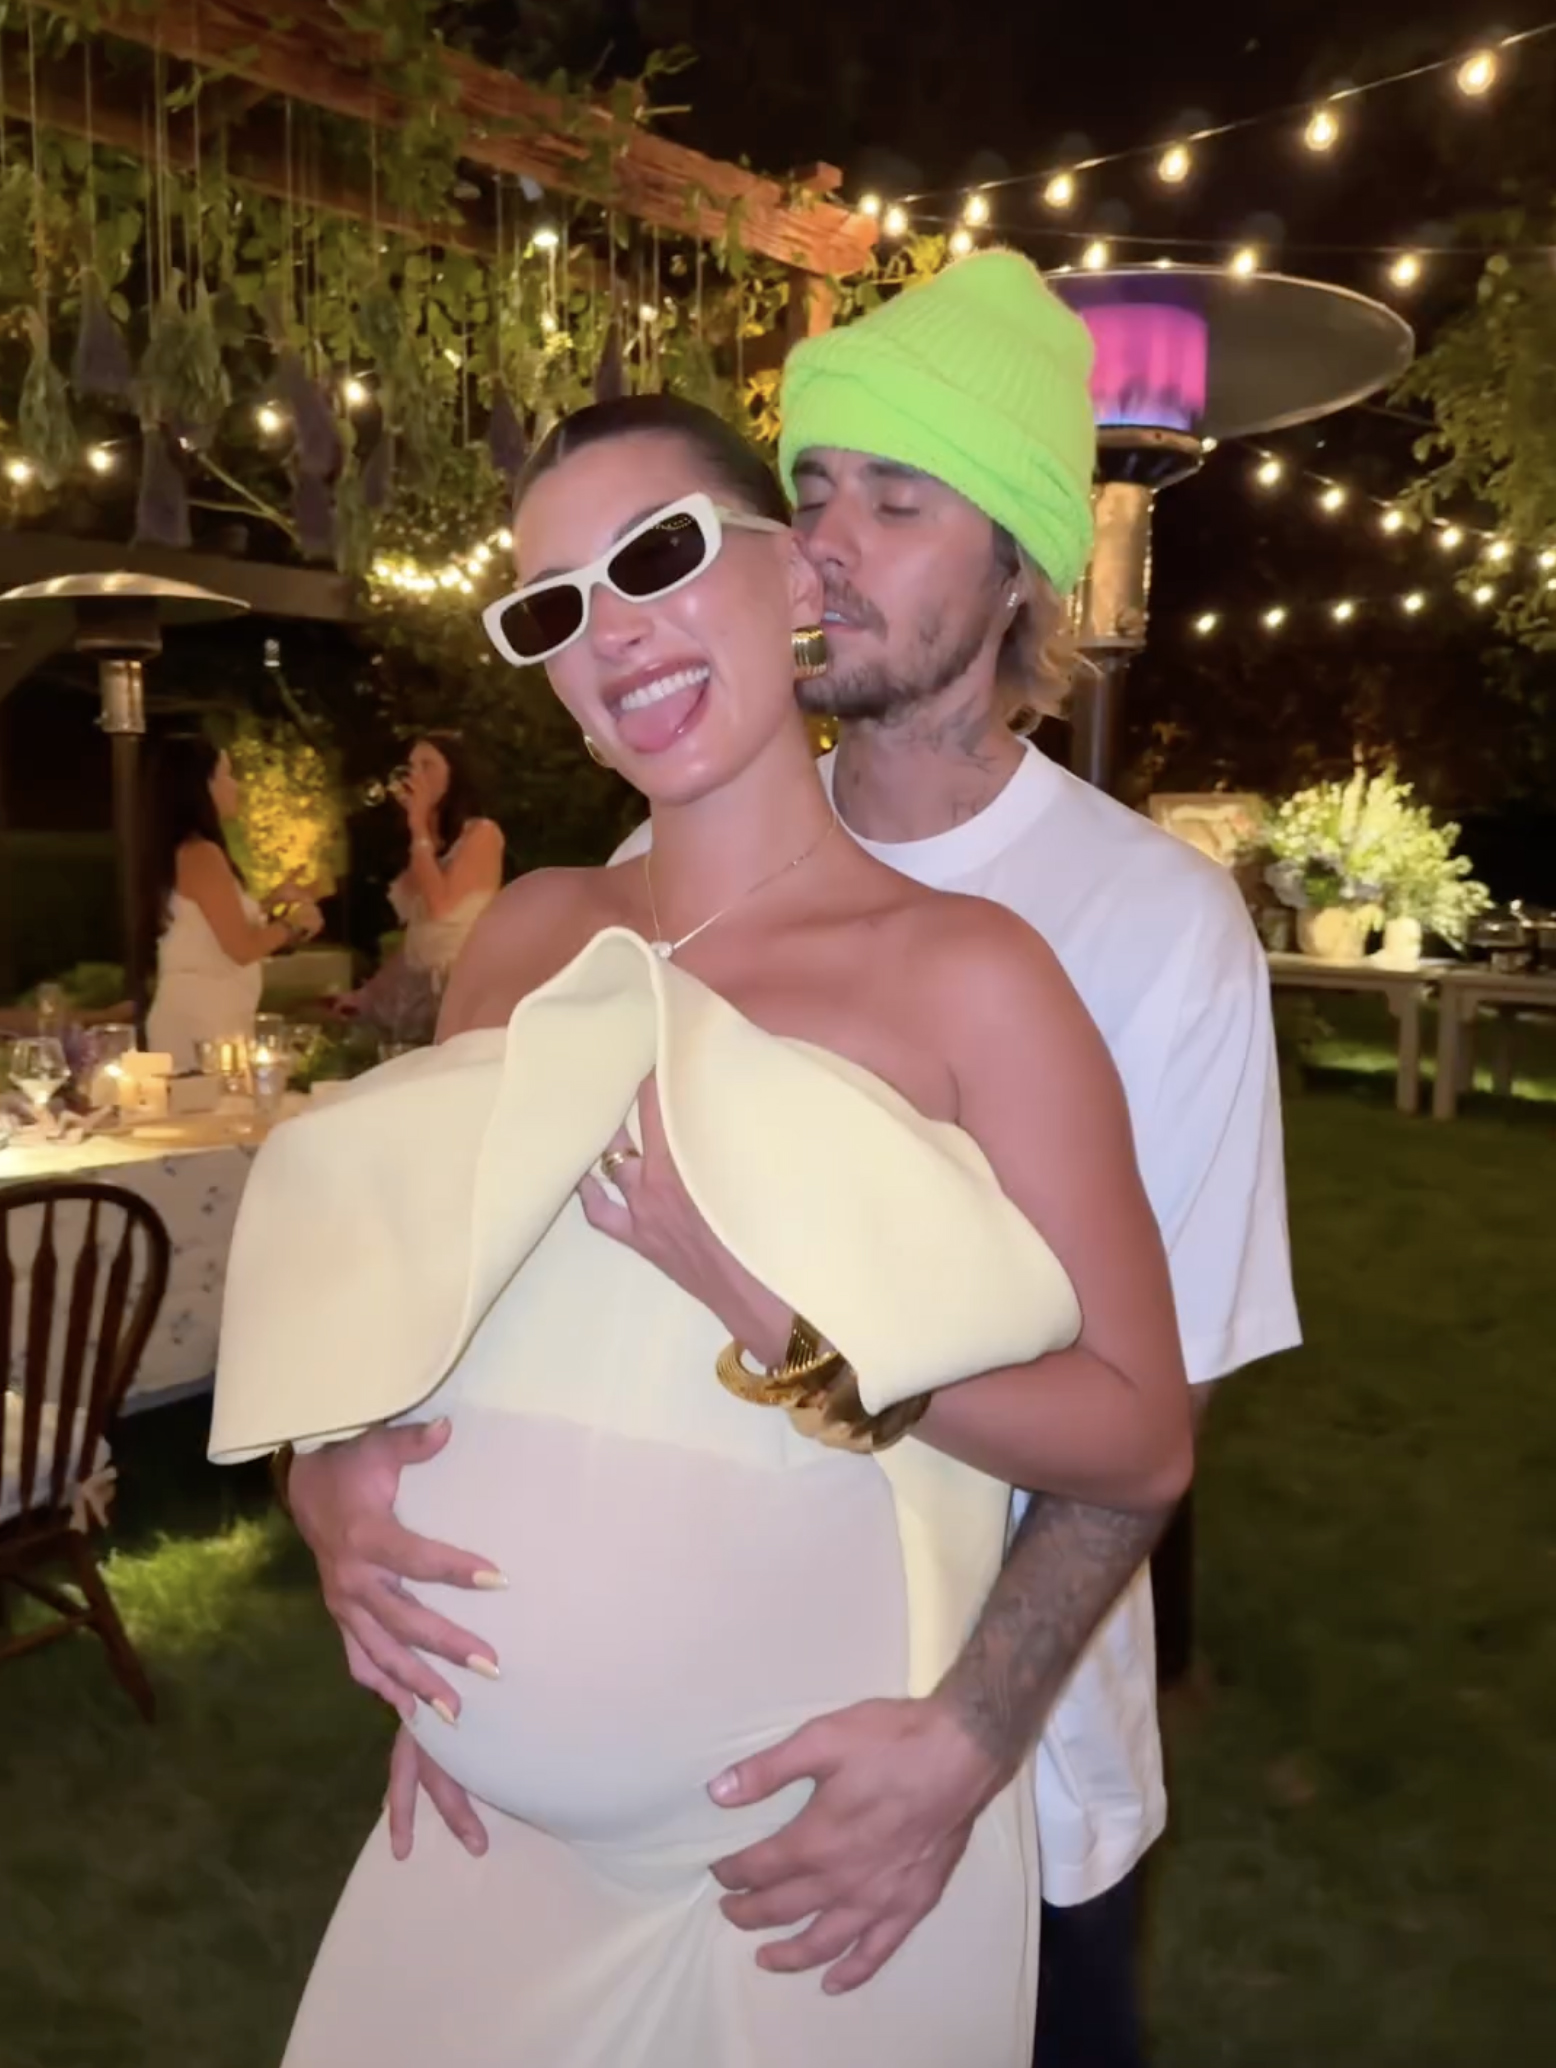 Hailey Bieber showed off her growing baby bump in a sheer, butter-yellow Jacquemus gown